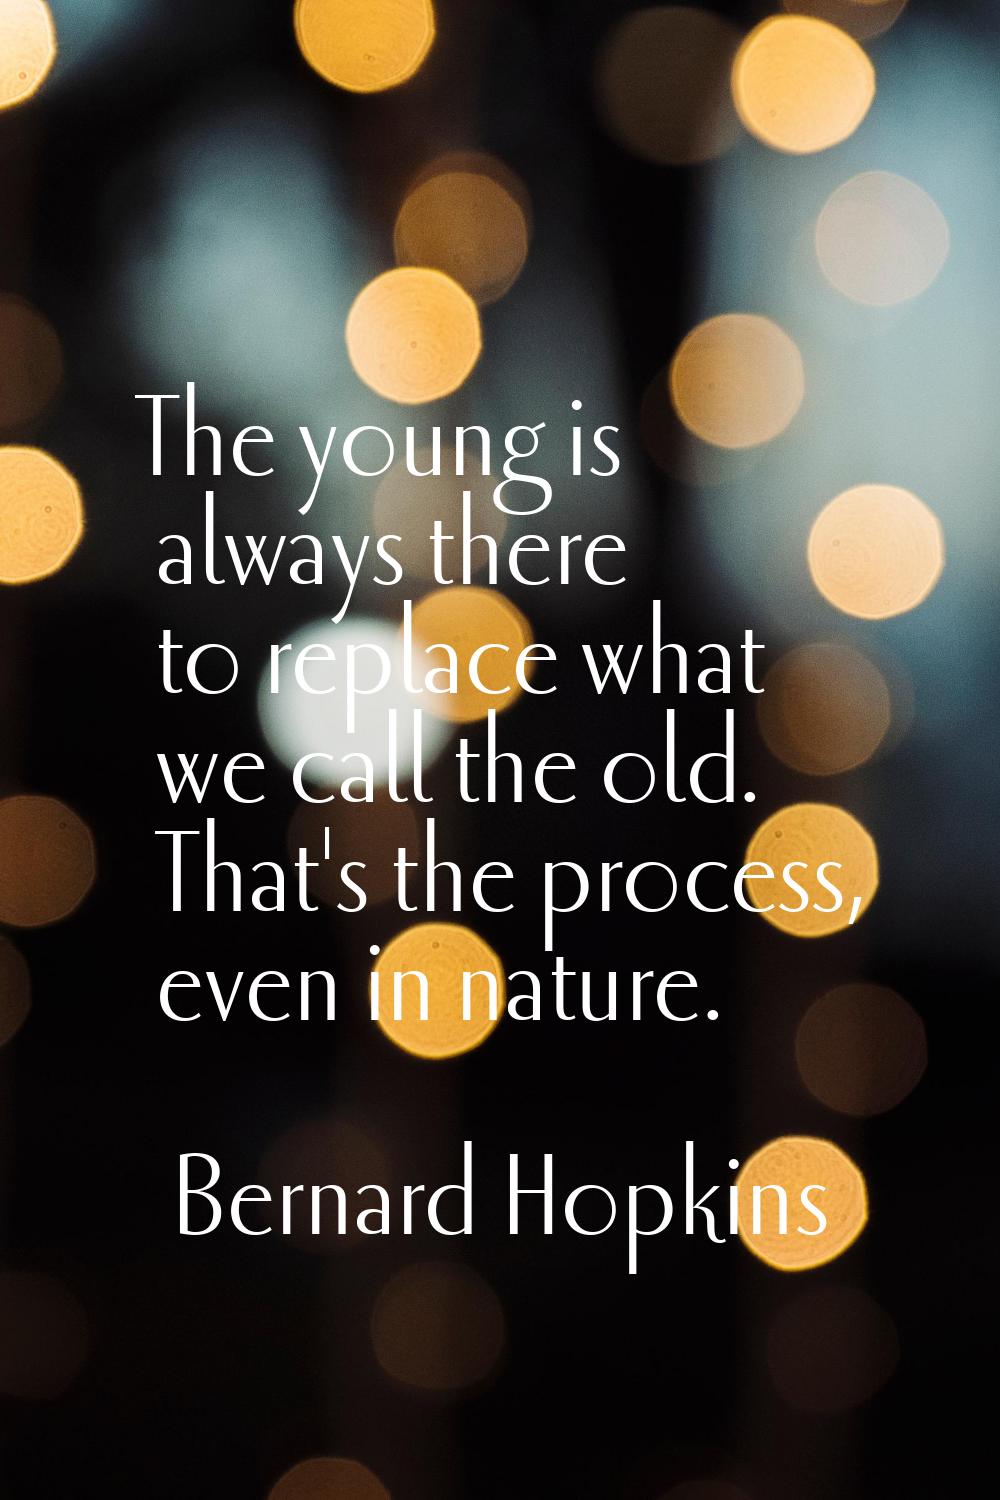 The young is always there to replace what we call the old. That's the process, even in nature.